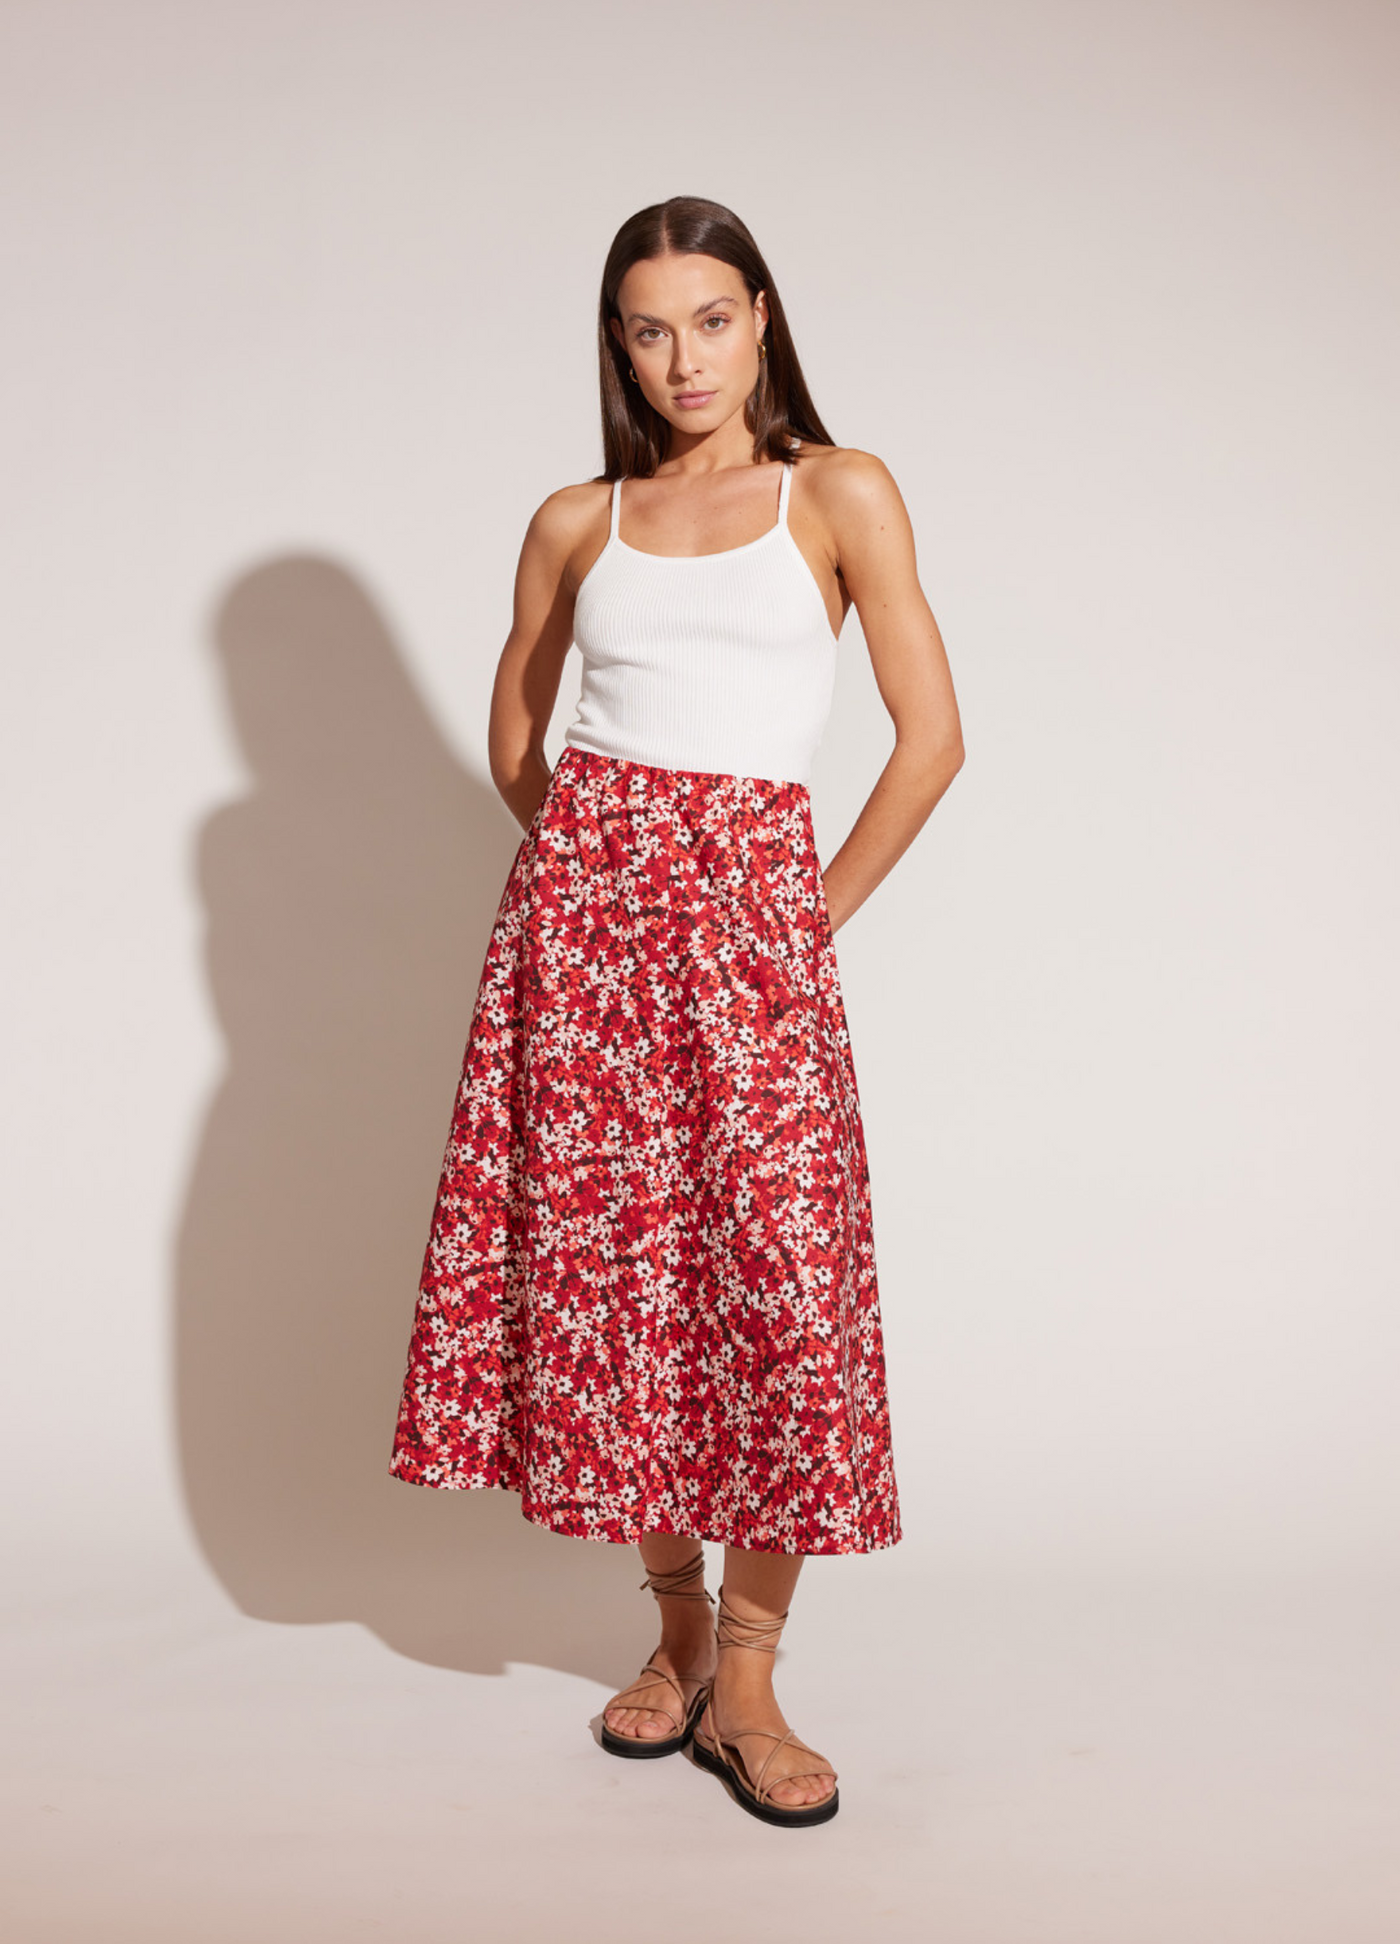 Model wearing red floral print bias cut Midi Skirt in red ditzy floral